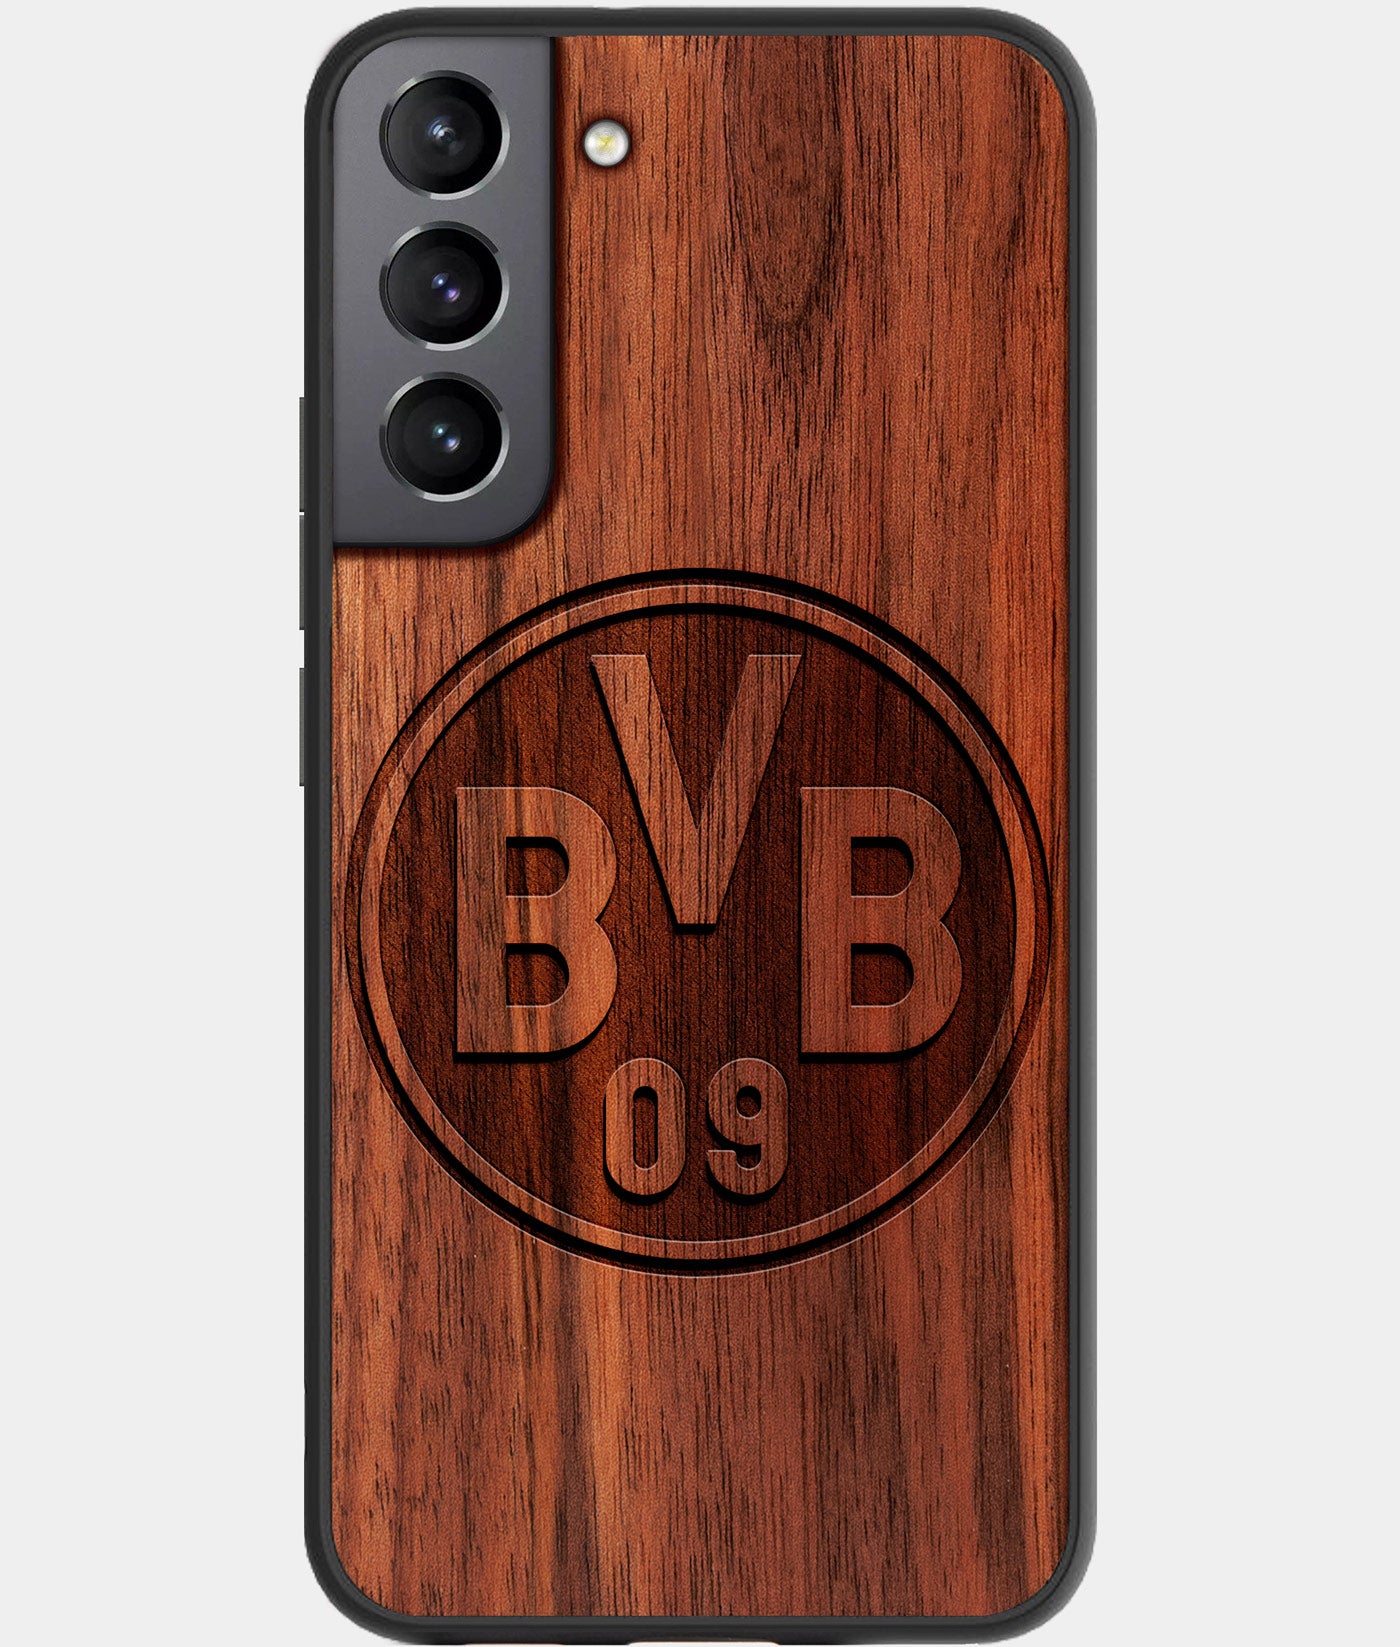 Best Walnut Wood Borussia Dortmund Galaxy S21 FE Case - Custom Engraved Cover - Engraved In Nature